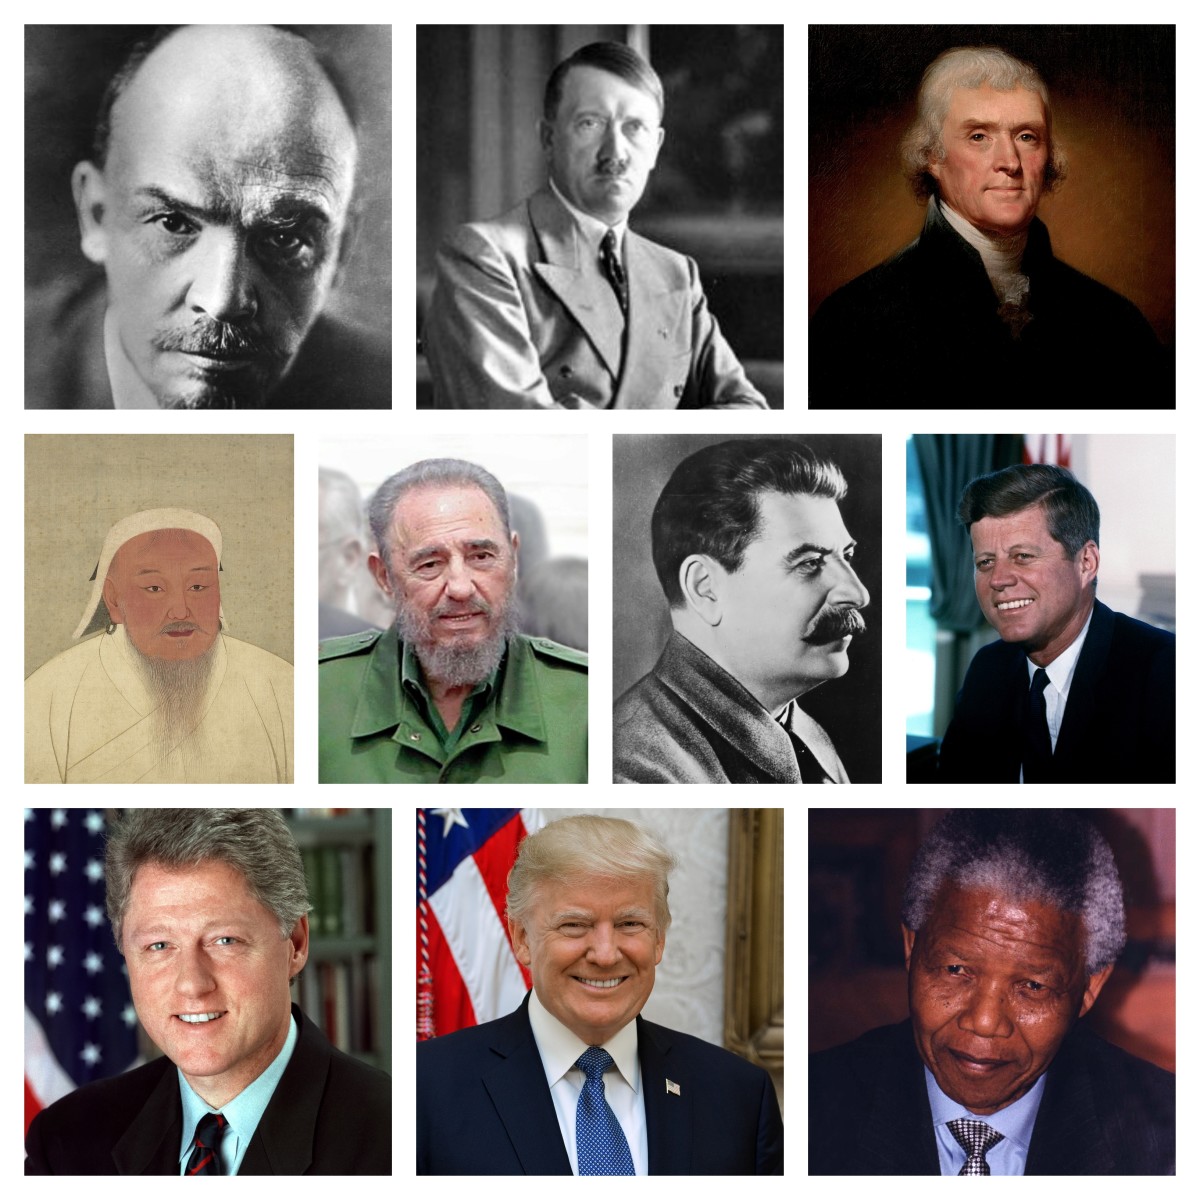 Who Said It? Quotes From Dictators and Presidents